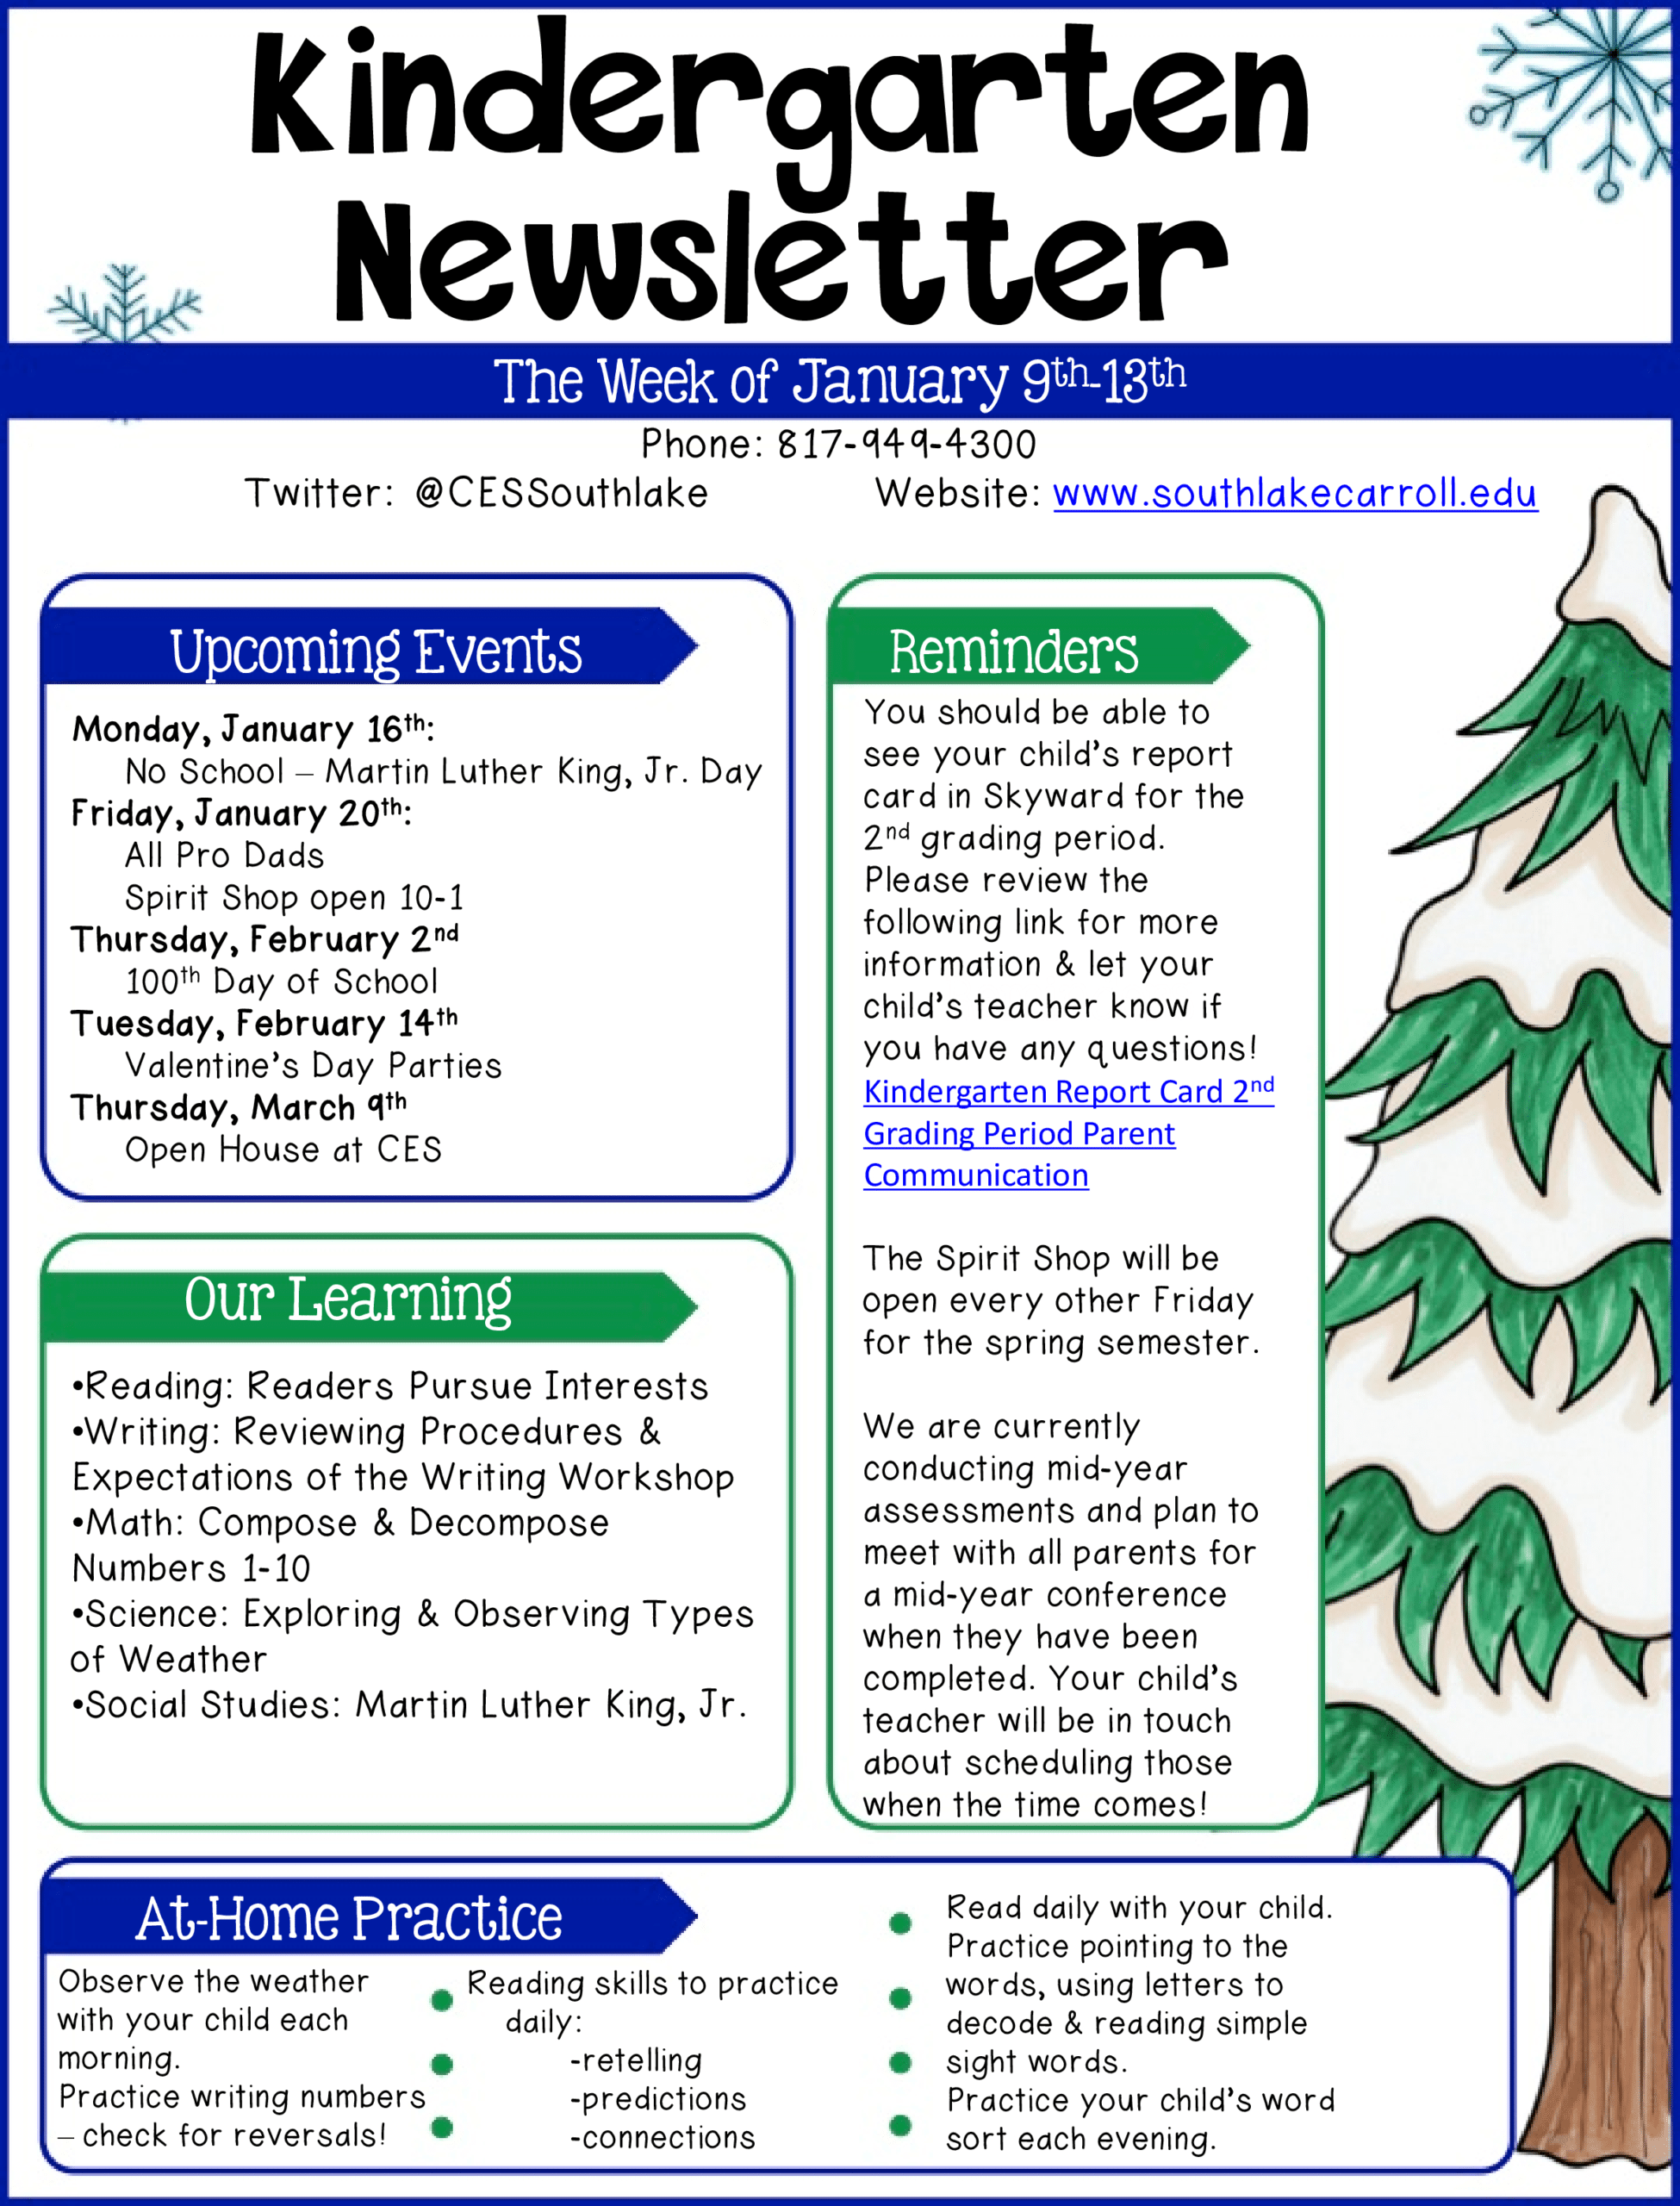 Kindergarten Newsletter Example | Templates At Throughout February Newsletter Template